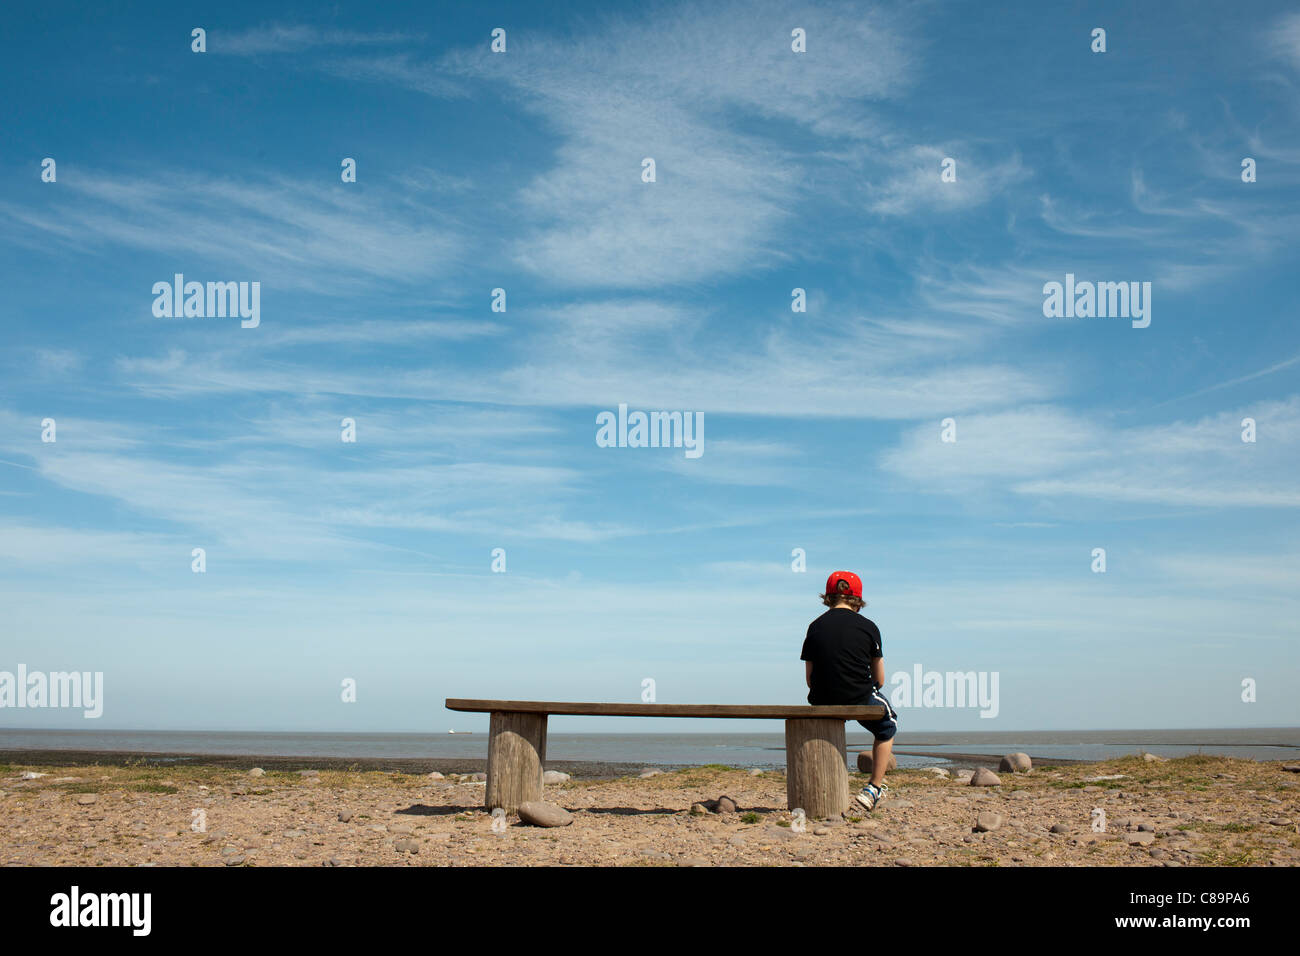 Young boy sitting alone on bench at seaside Stock Photo